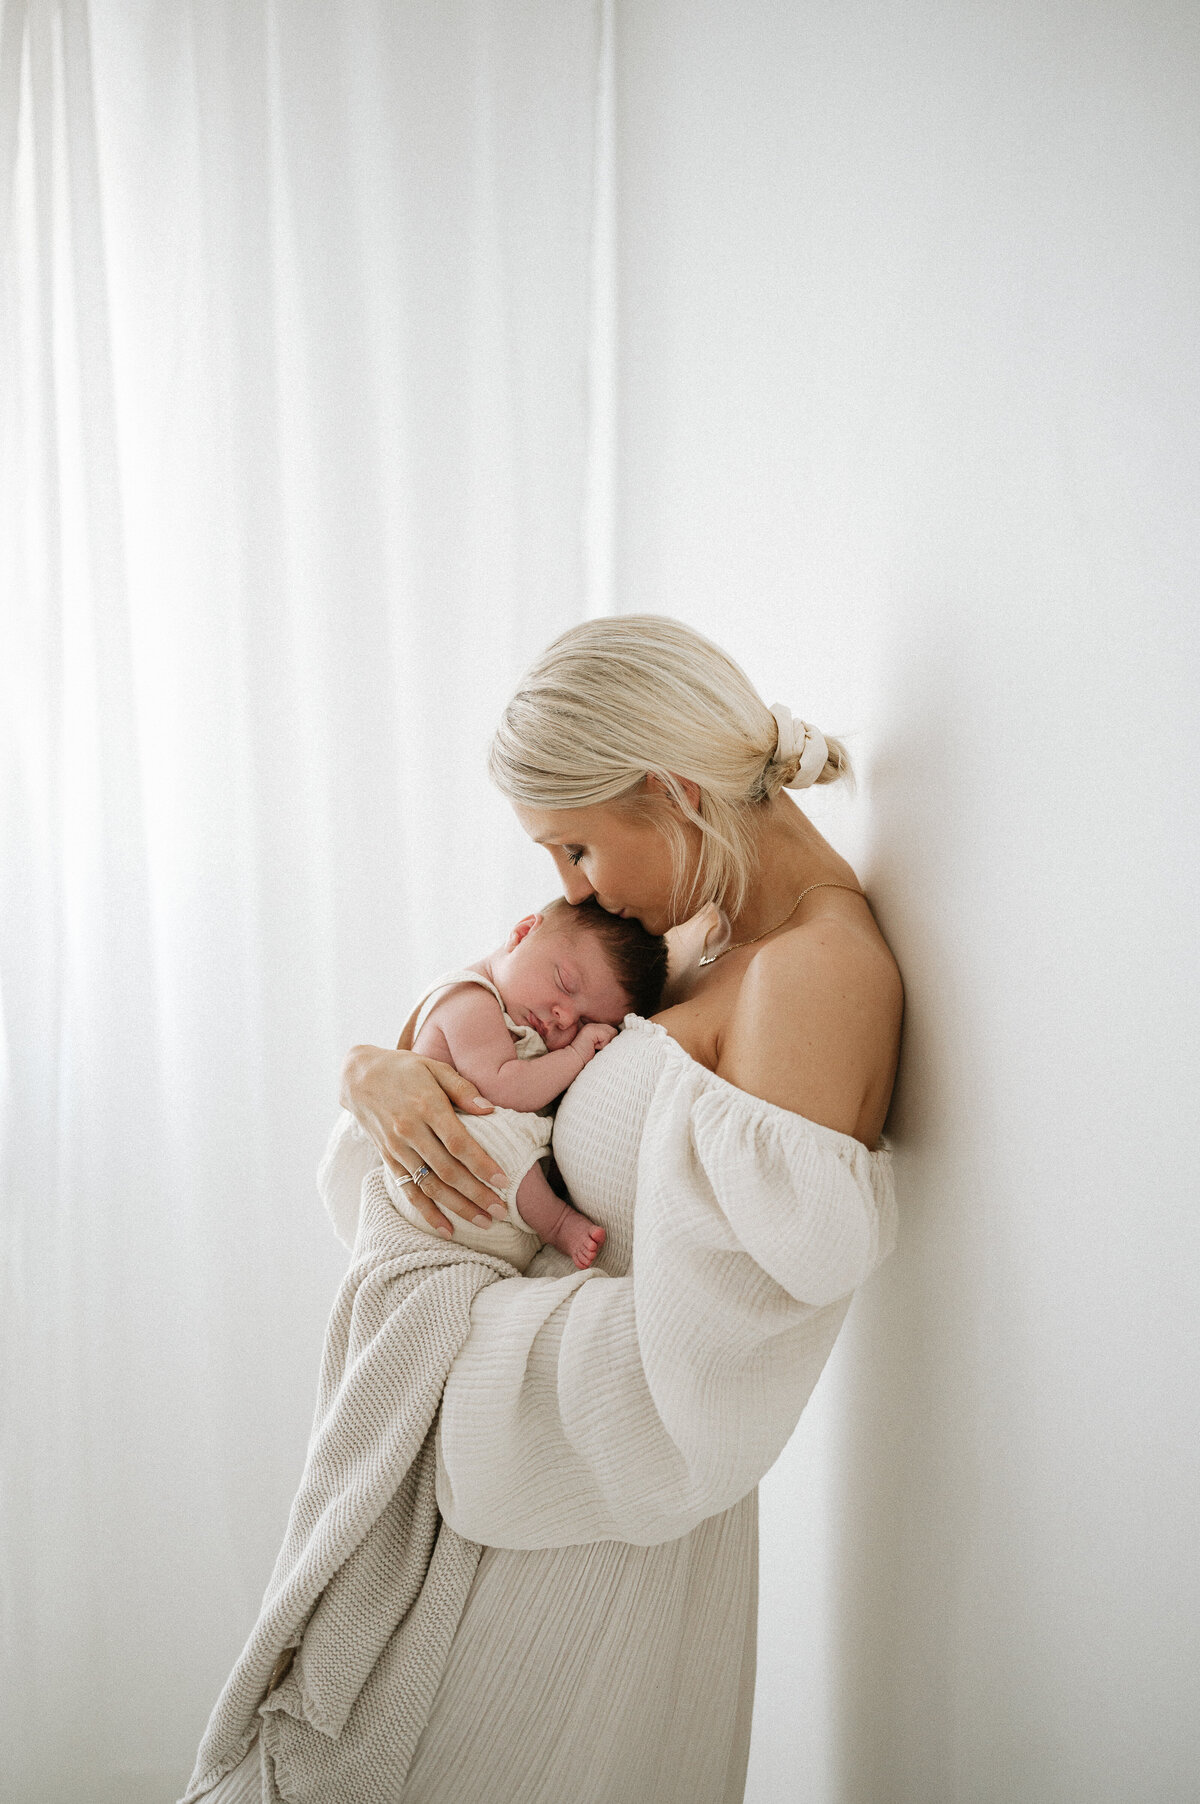 Mother cuddles her sleeping baby against a white wall